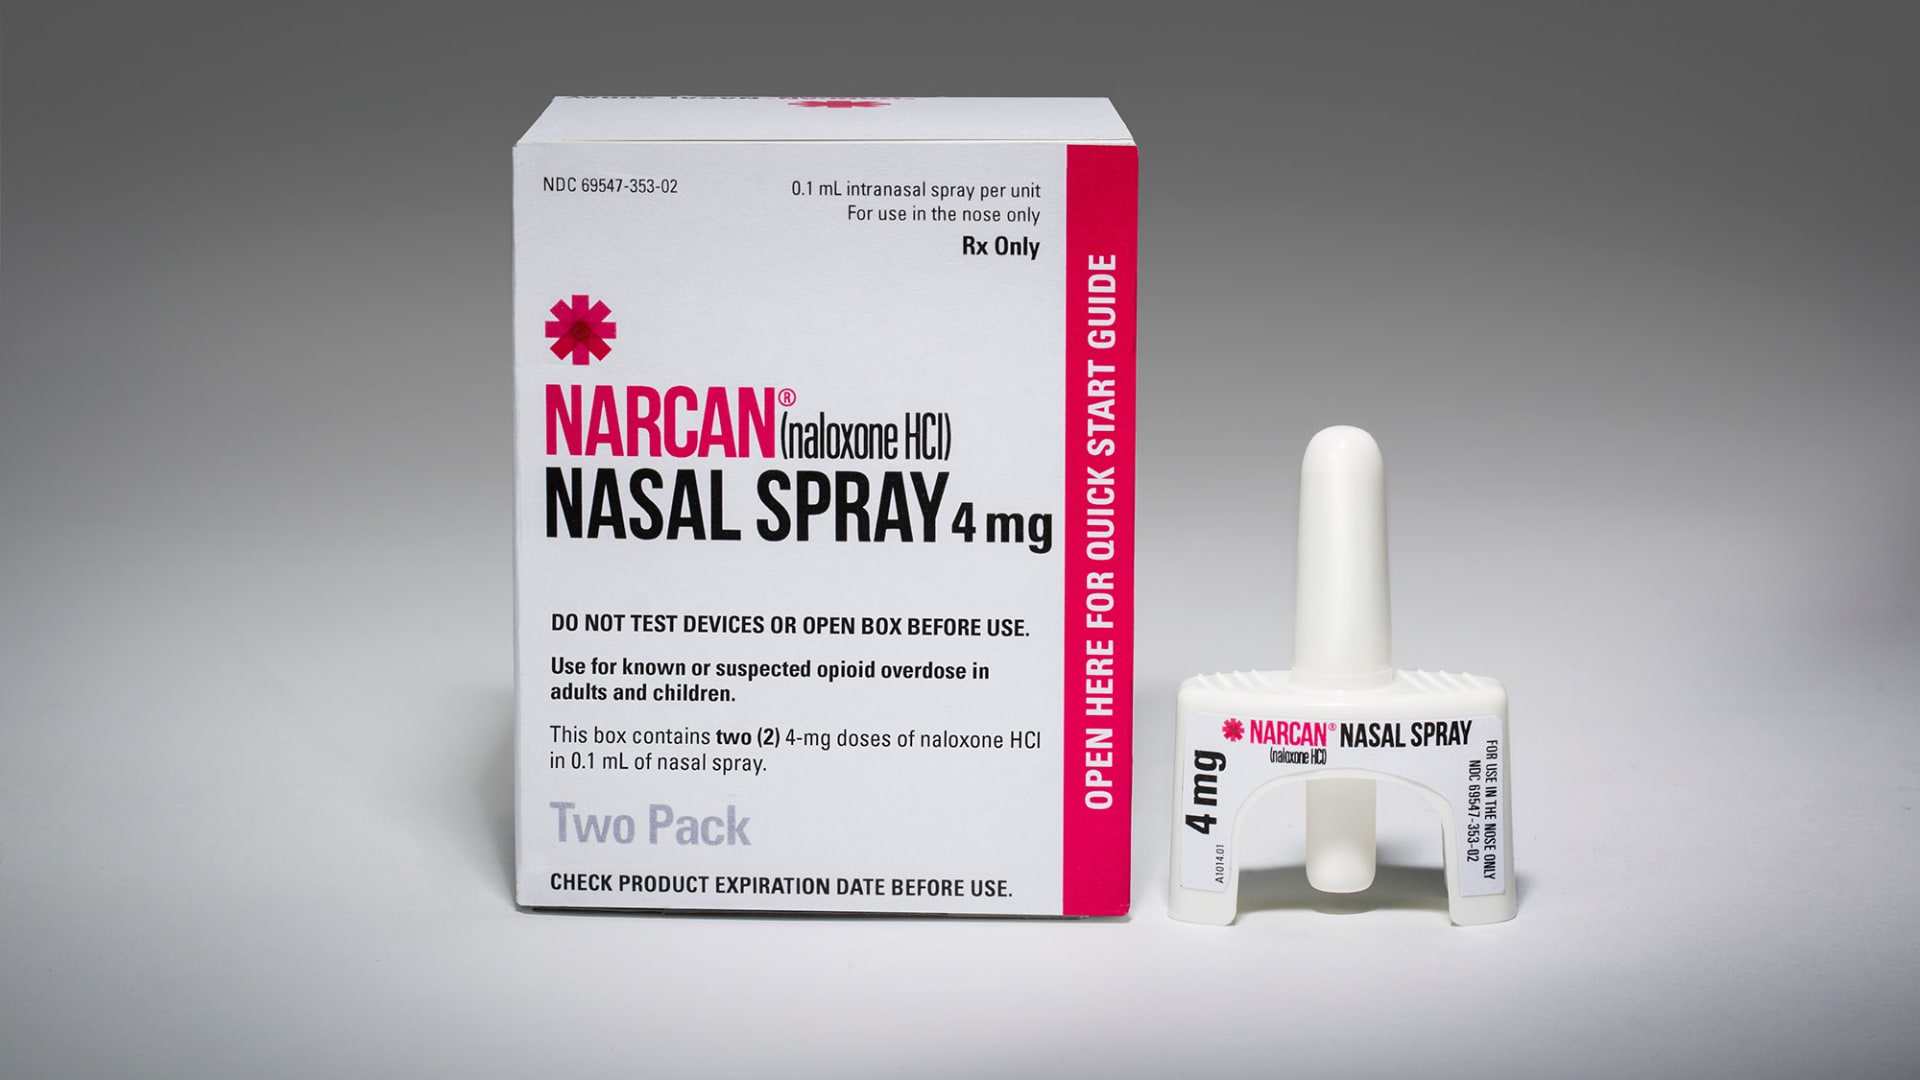 fda-advisors-recommend-over-the-counter-use-of-lifesaving-opioid-overdose-treatment-narcan-–-asia-newsday